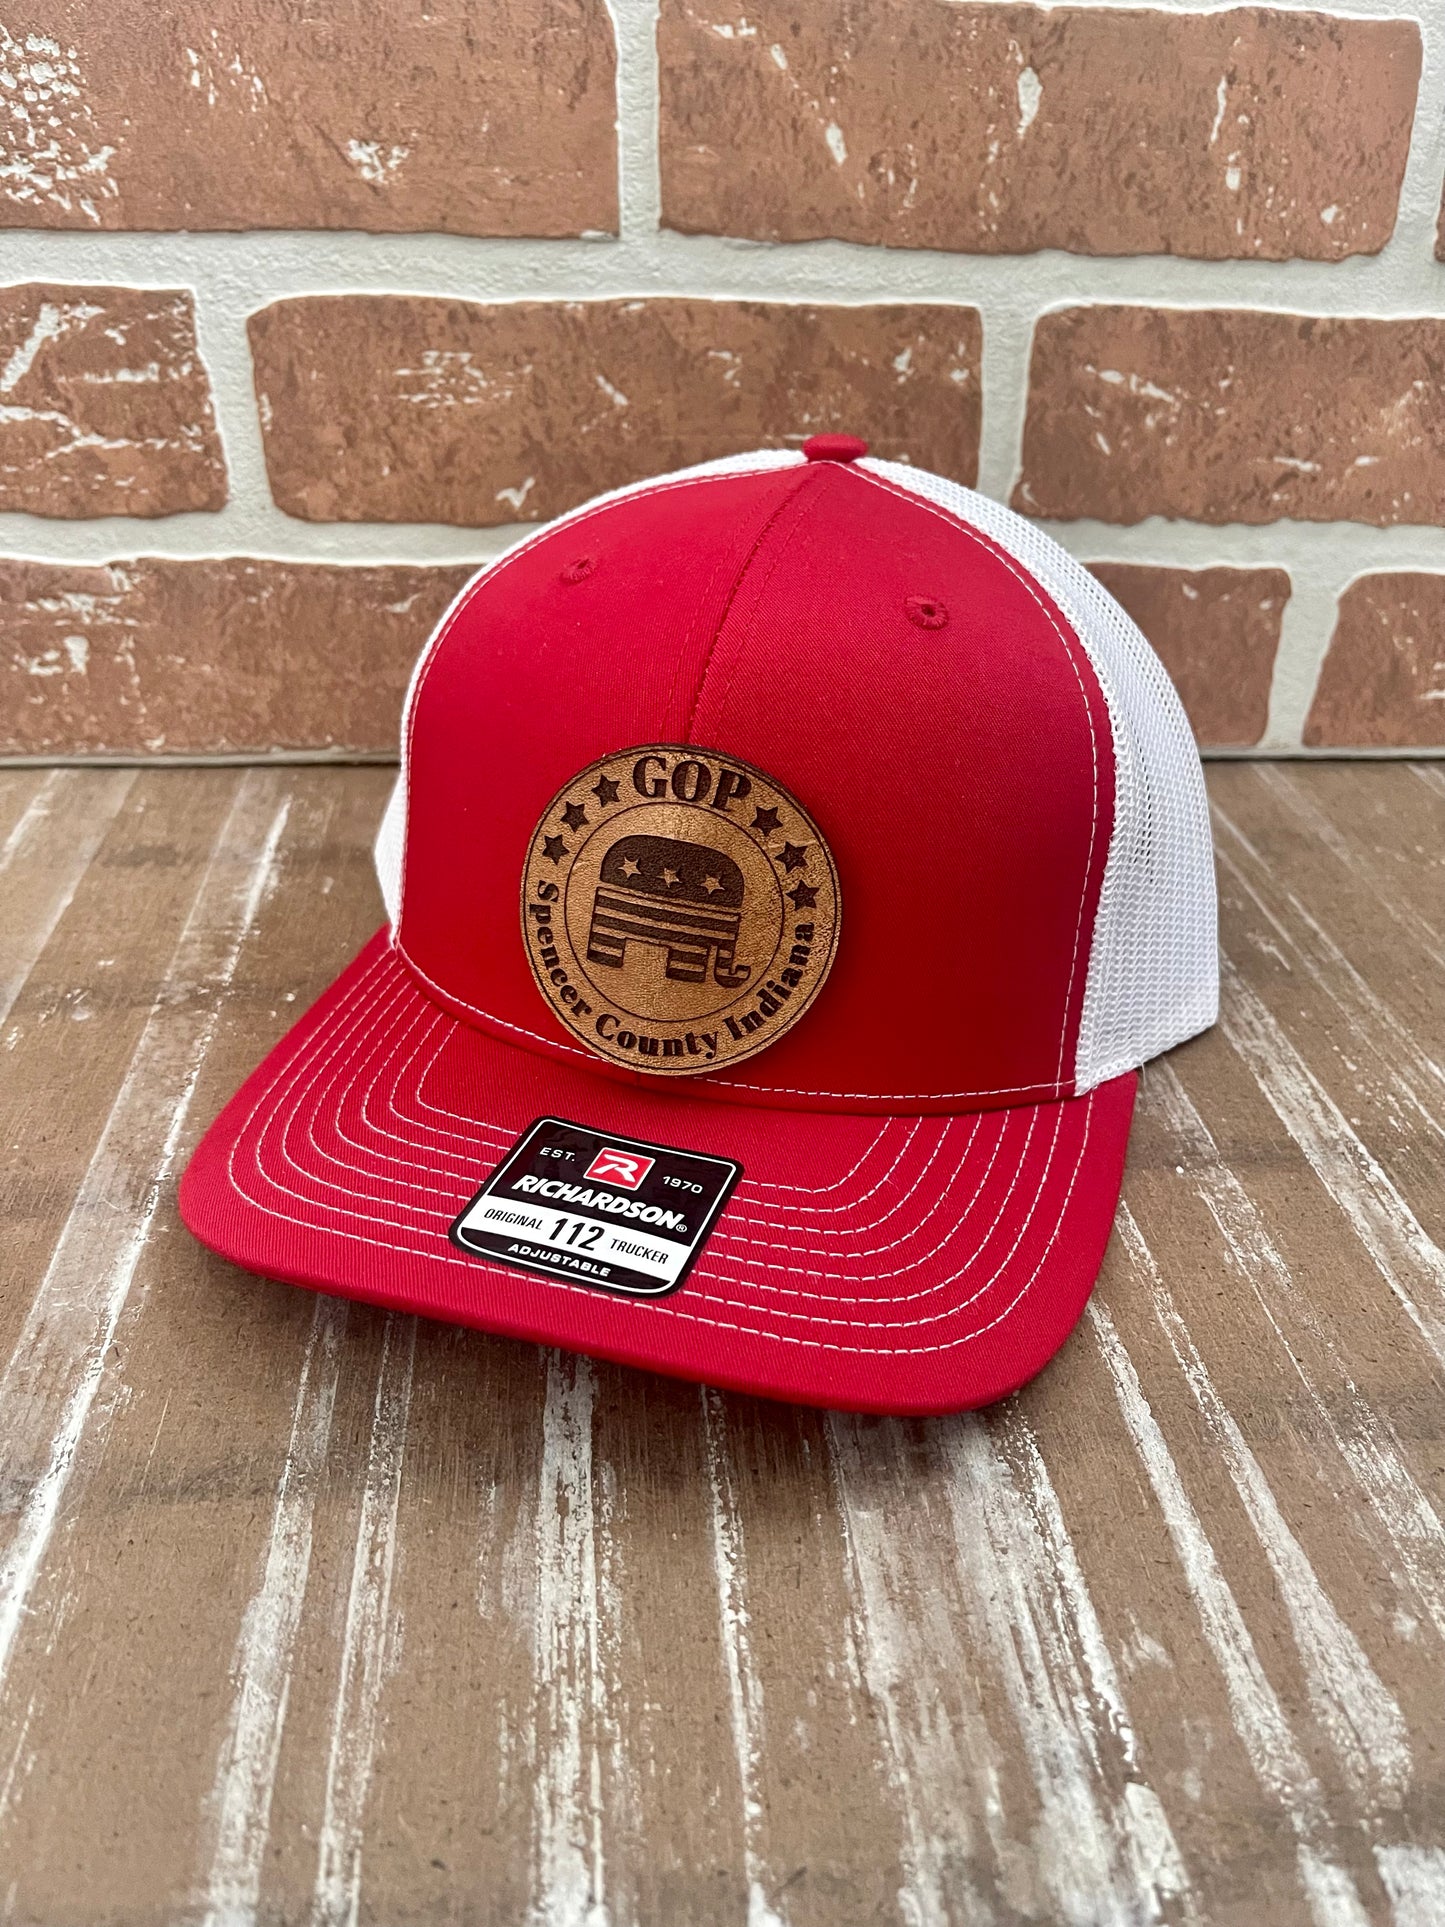 Spencer Co GOP Circle Patch Hat